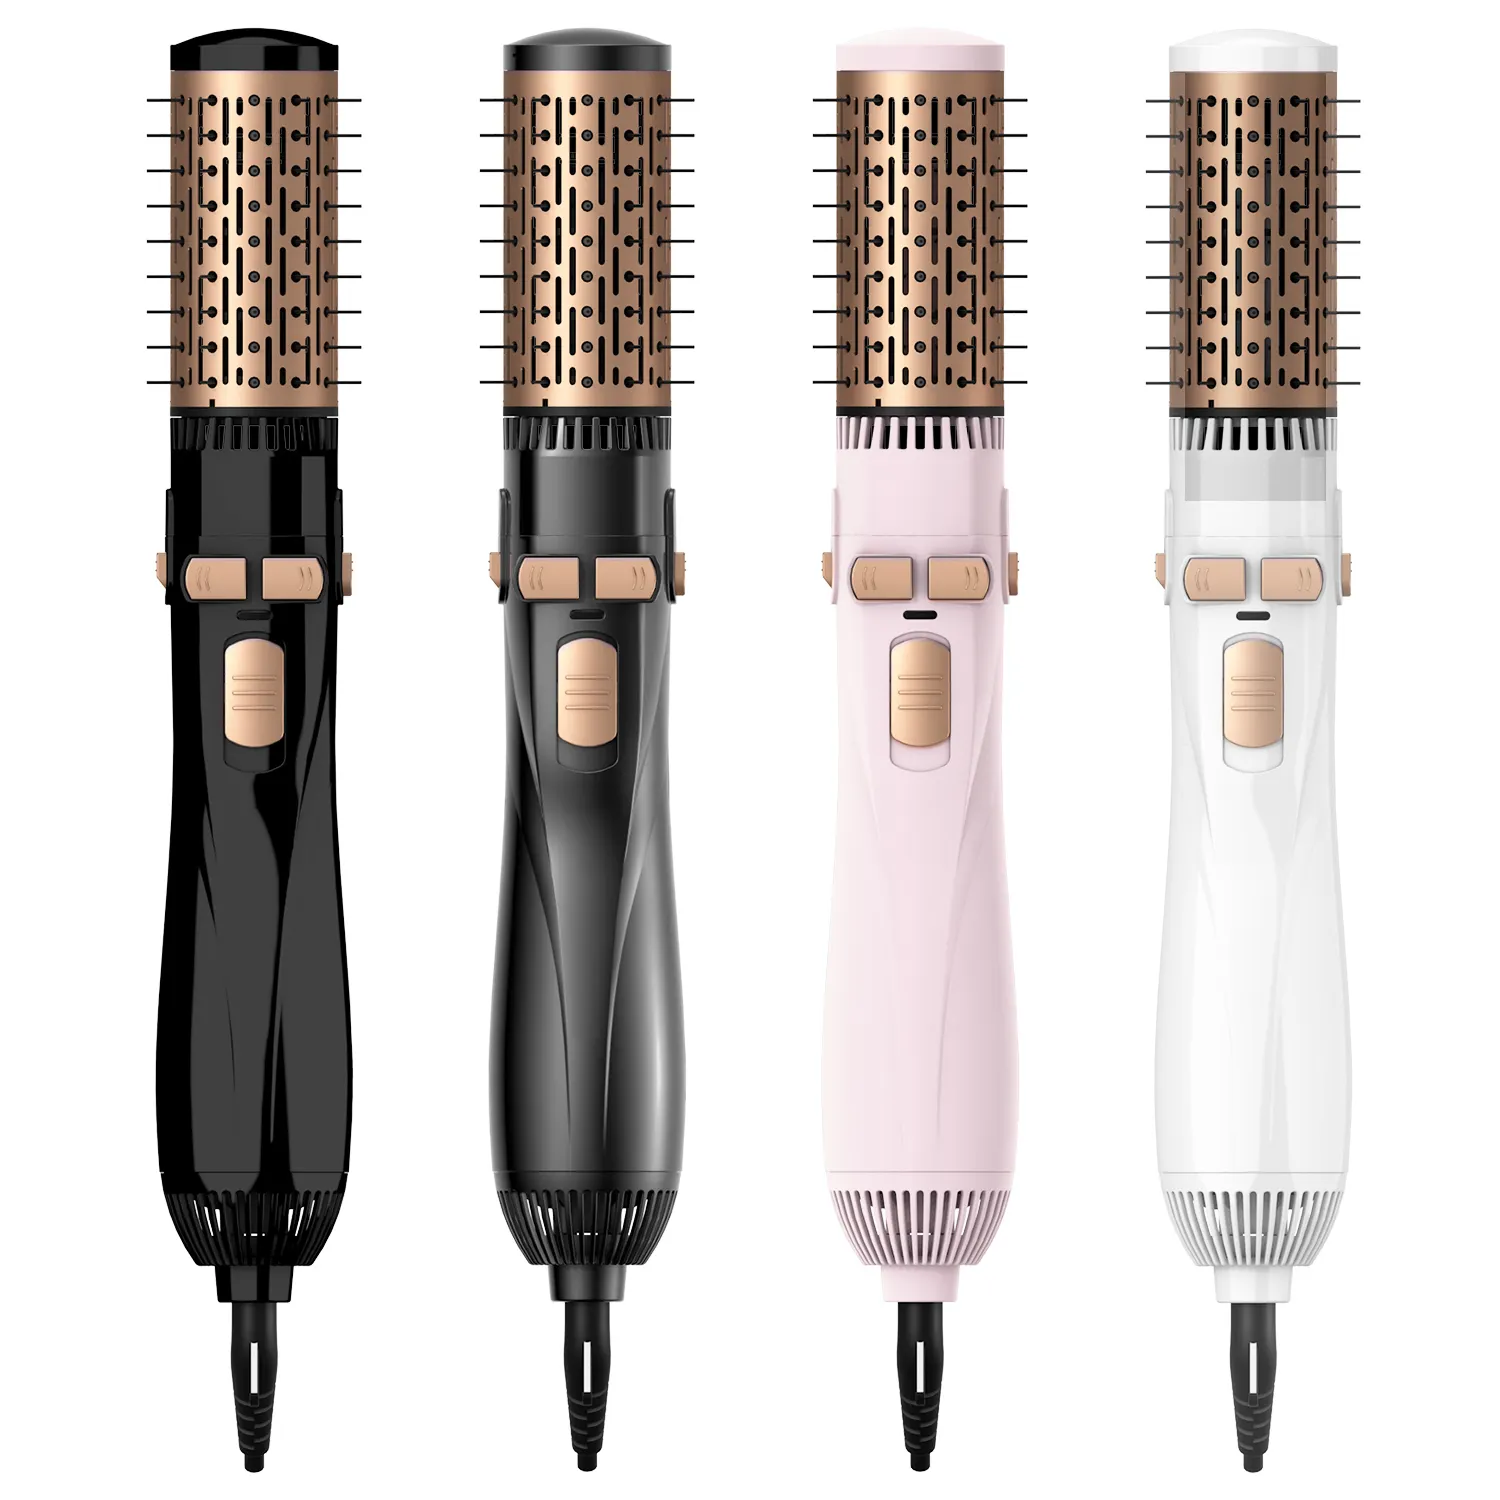 New Hair Dryer and Hot Air Brush Ionic Hair Dryer Comb 2 Speeds And 2 Heating Settings Professional One Step Hair Dryer Curler